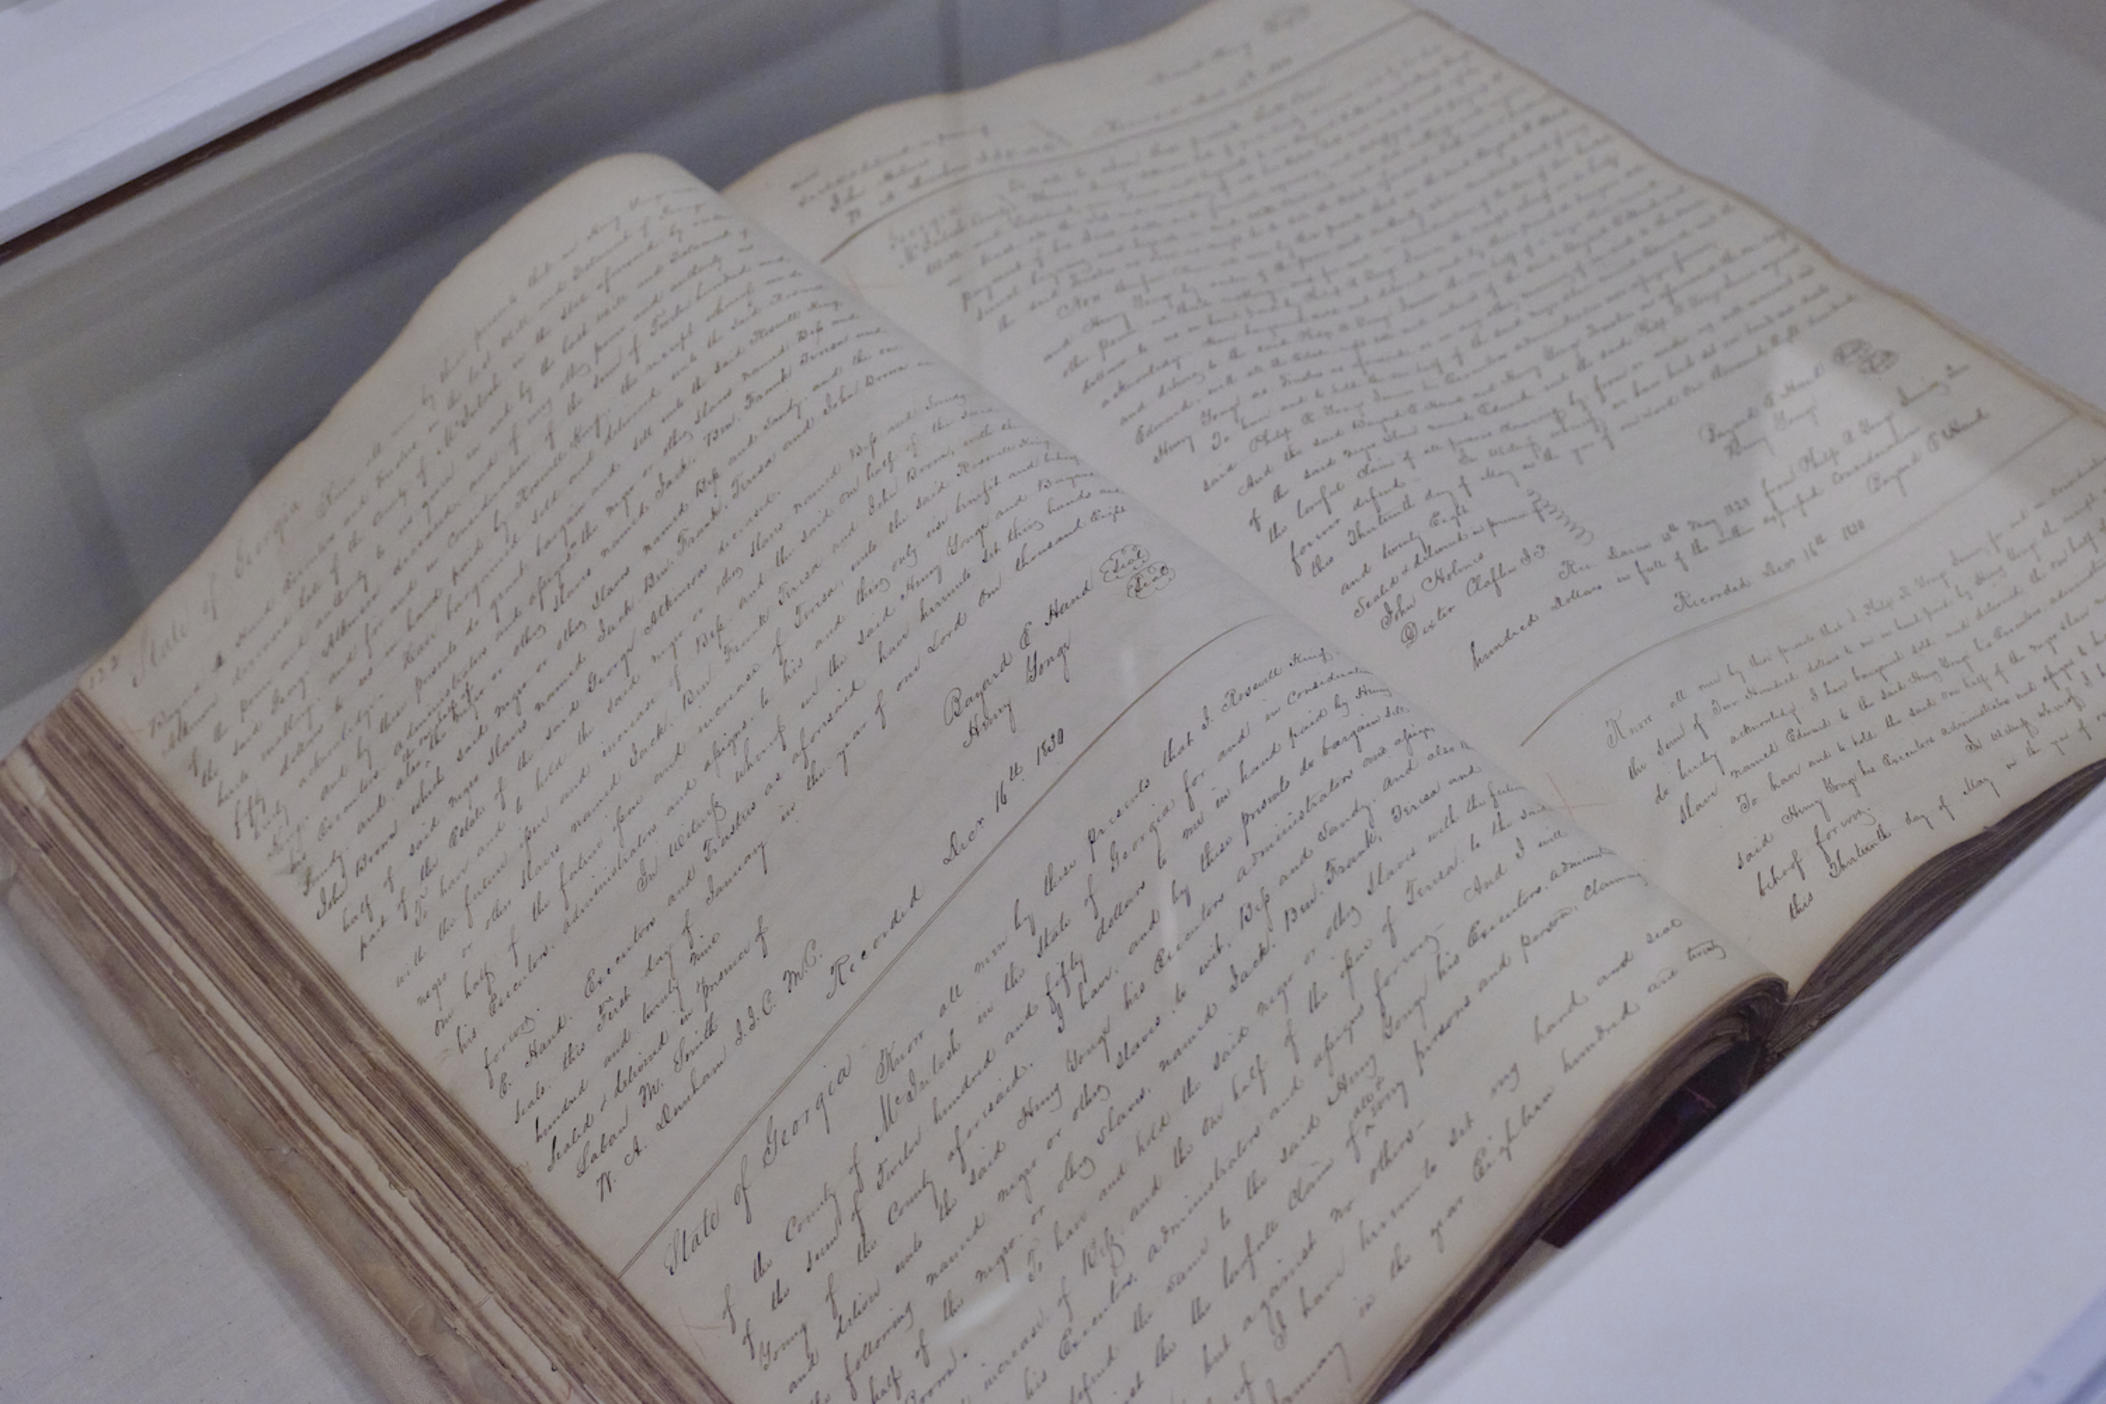 At the Tubman Museum, old deed books contain property records, recorded transactions that convey ownership, such as selling houses or livestock. It was shocking to see human names on that list, Erica Woodford said.